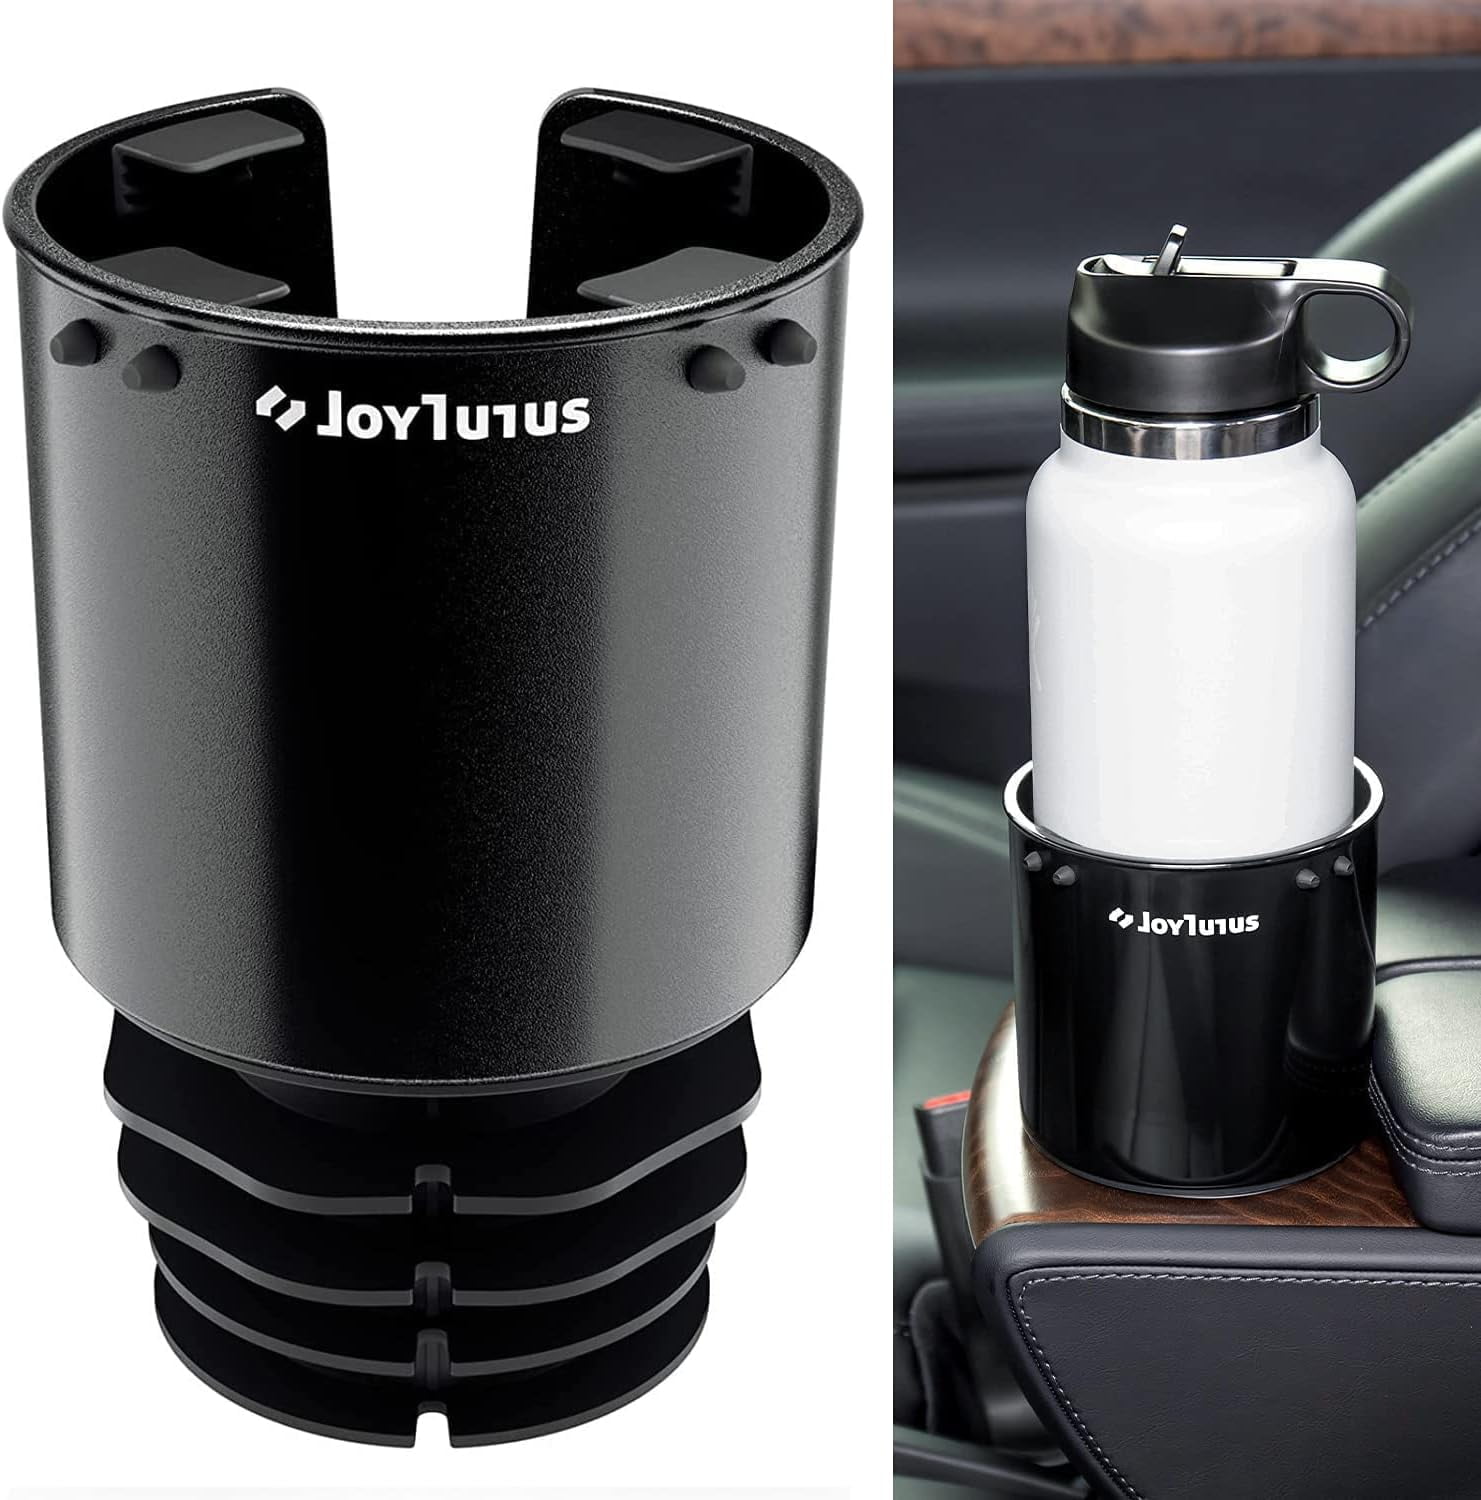 JOYTUTUS Cup Holder Expander for Car,Compatible with YETI, Hydro Flask,  Nalgene,Cup Holder for Car Hold 18-40 oz Bottles and Mugs 